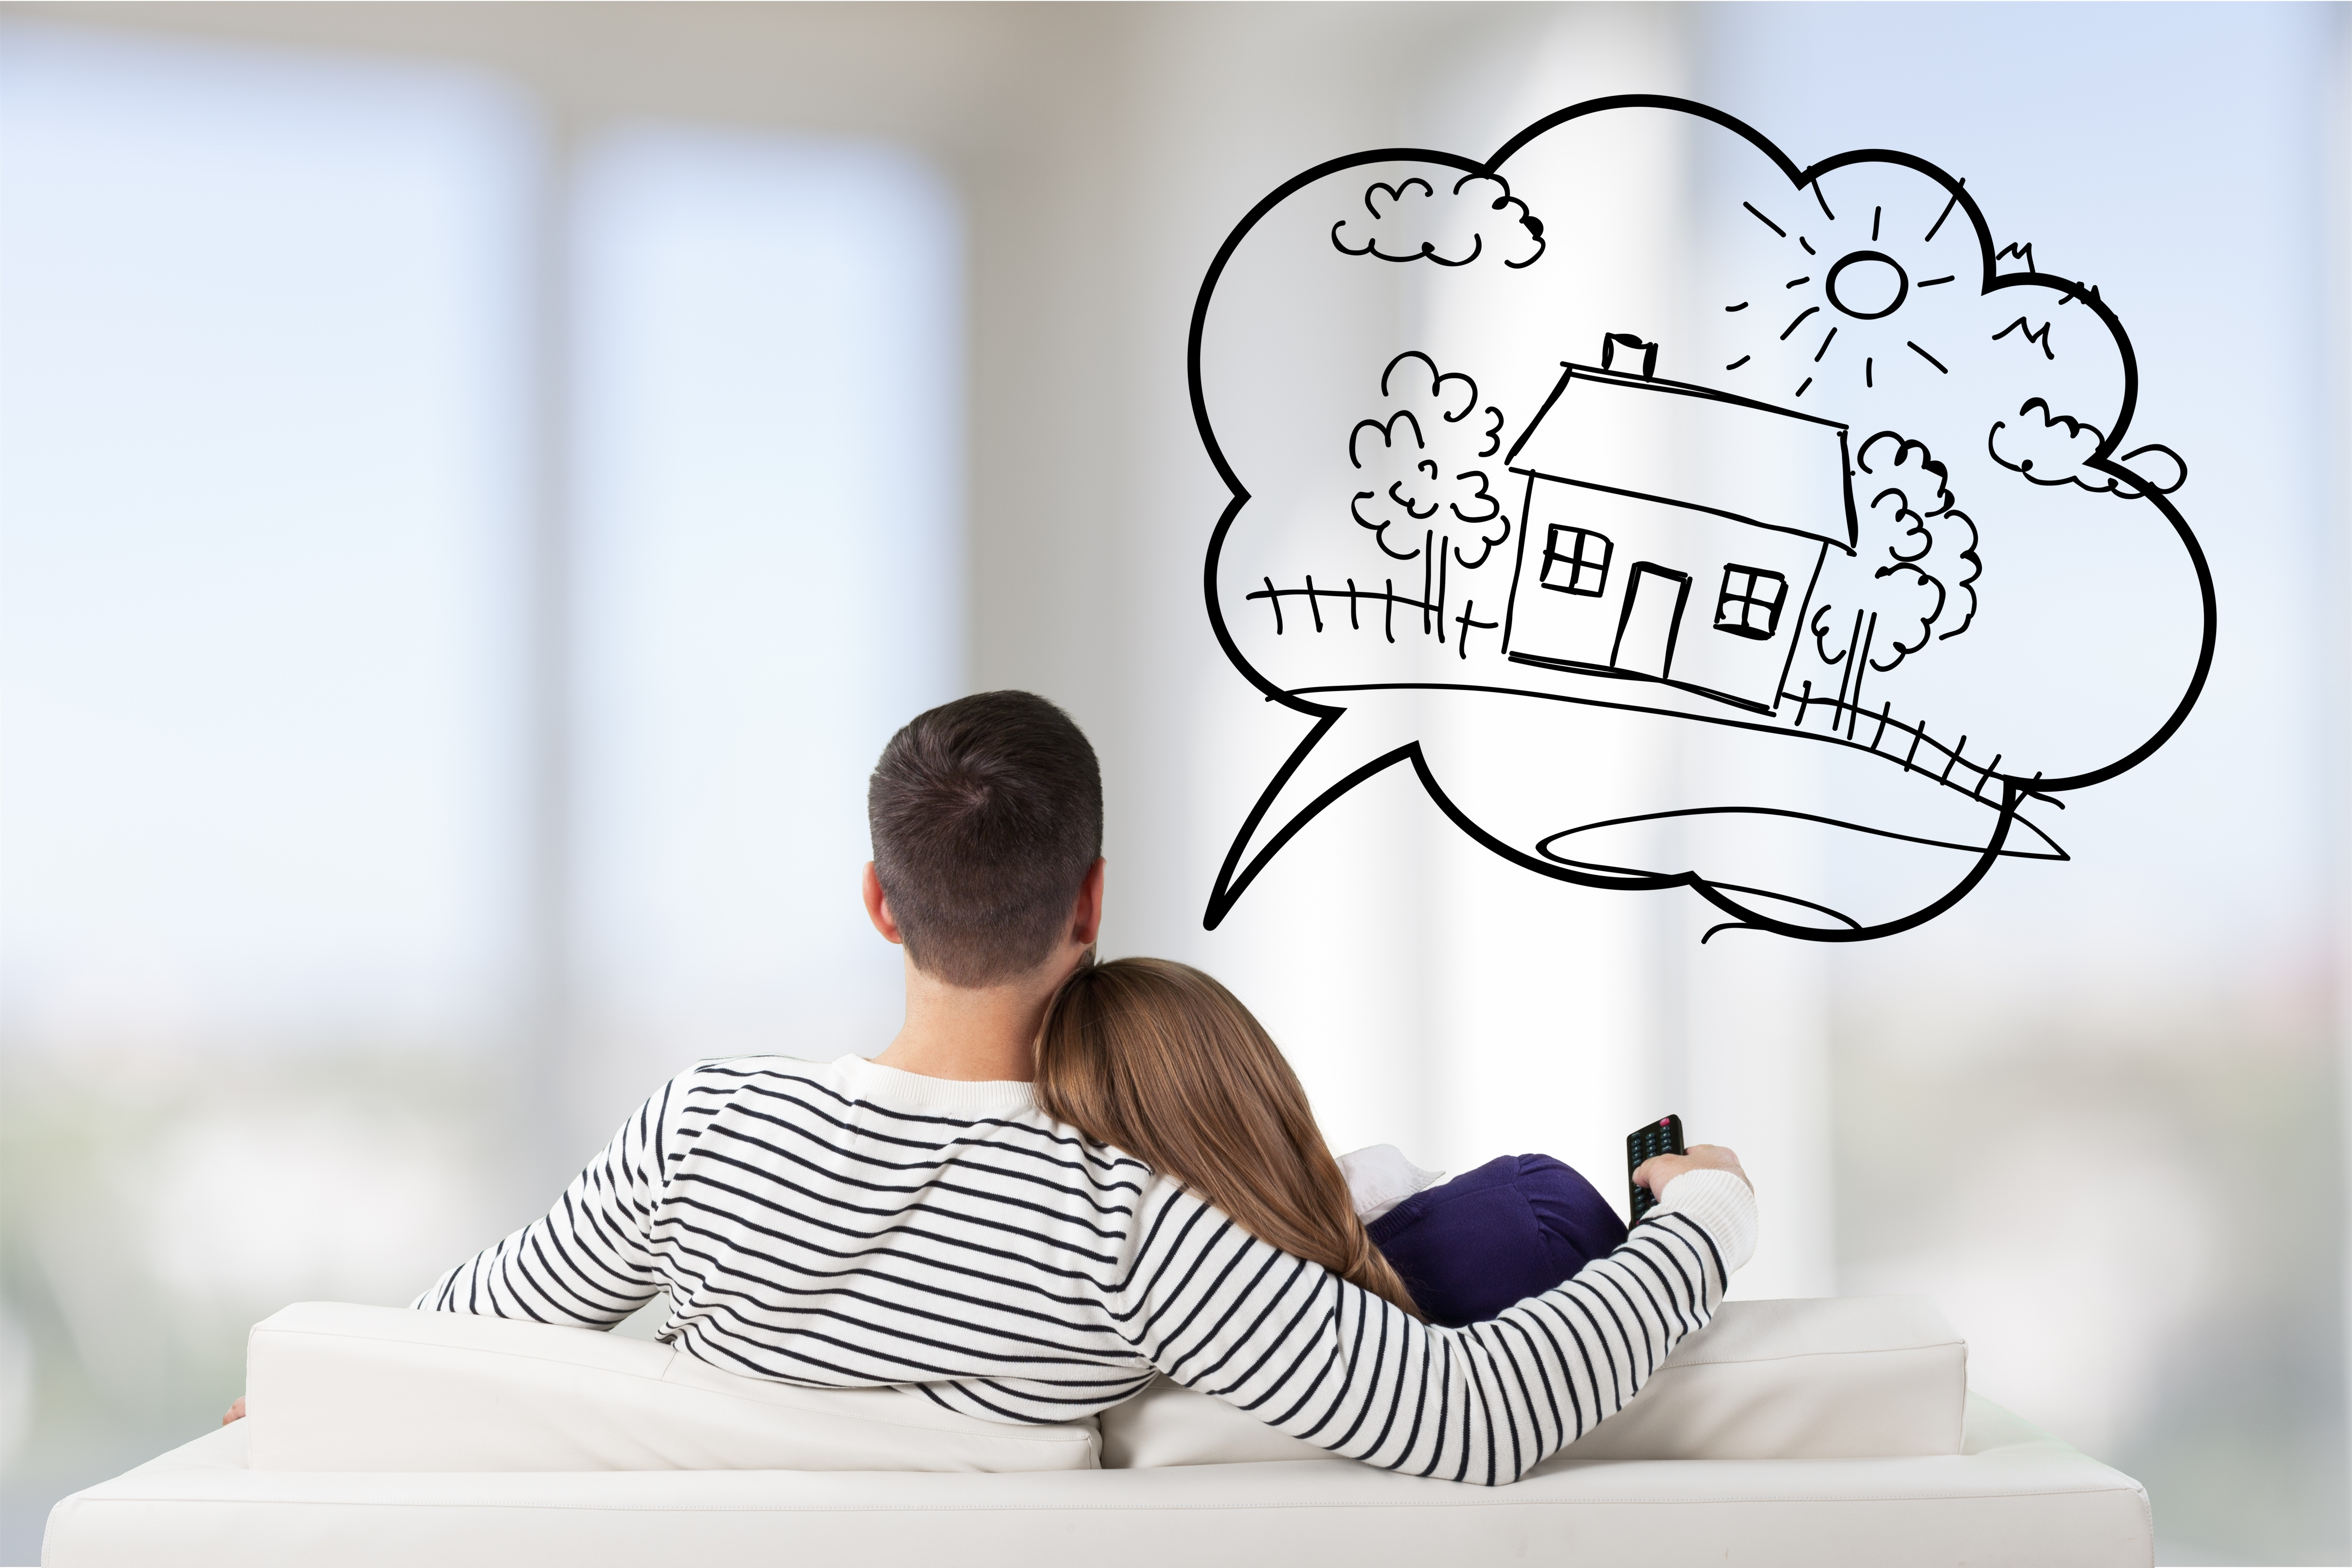 Reduce Stress in the Home Buying Experience